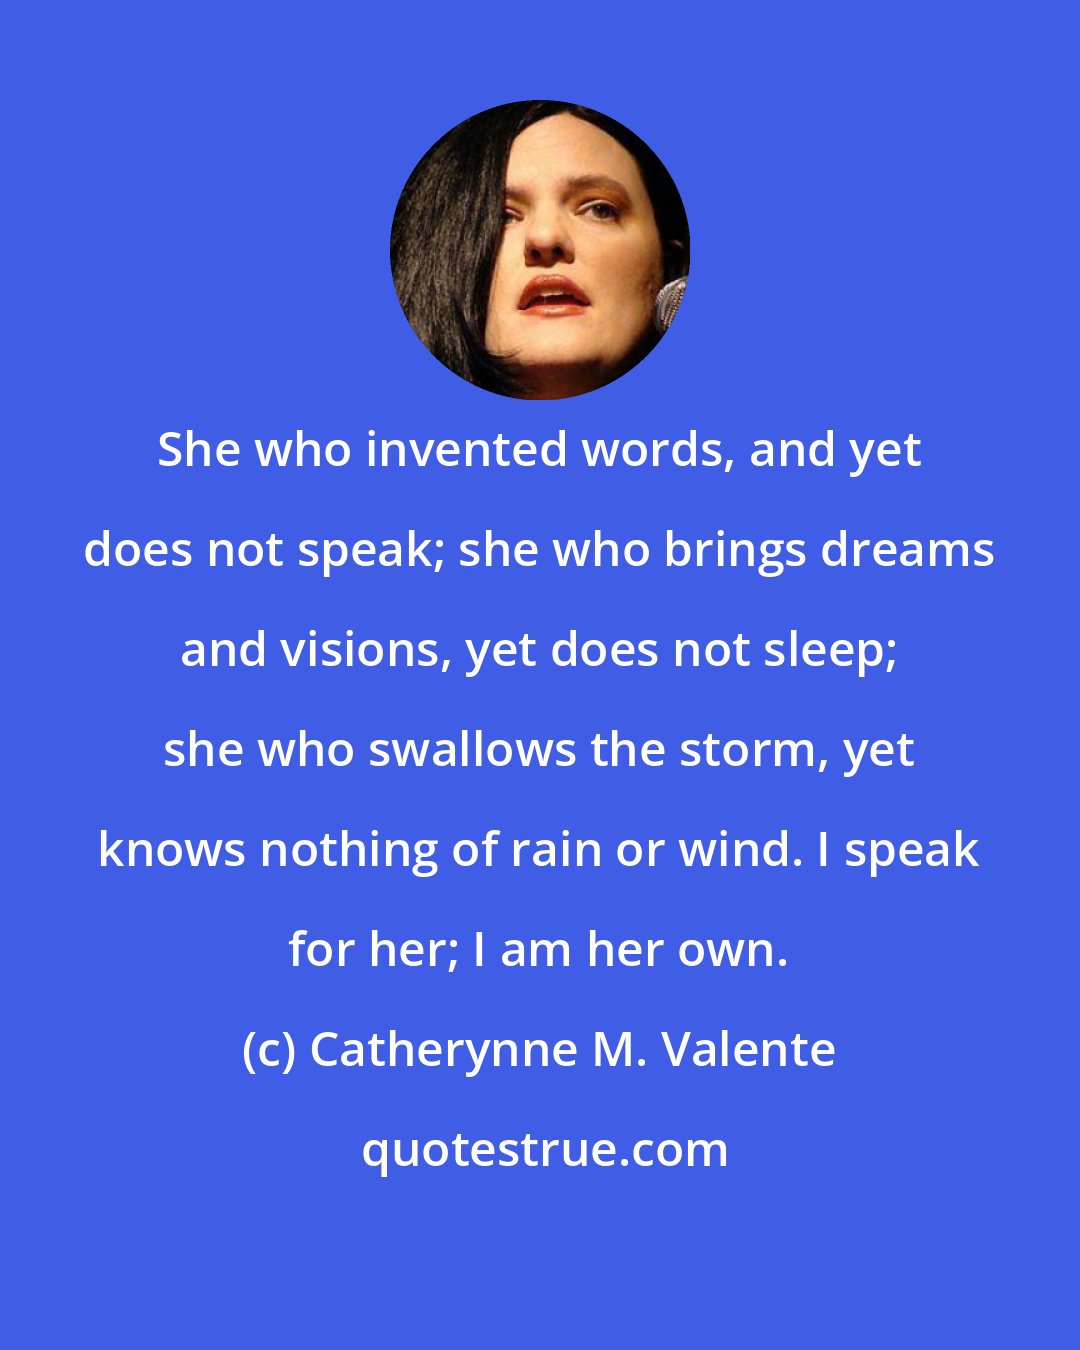 Catherynne M. Valente: She who invented words, and yet does not speak; she who brings dreams and visions, yet does not sleep; she who swallows the storm, yet knows nothing of rain or wind. I speak for her; I am her own.